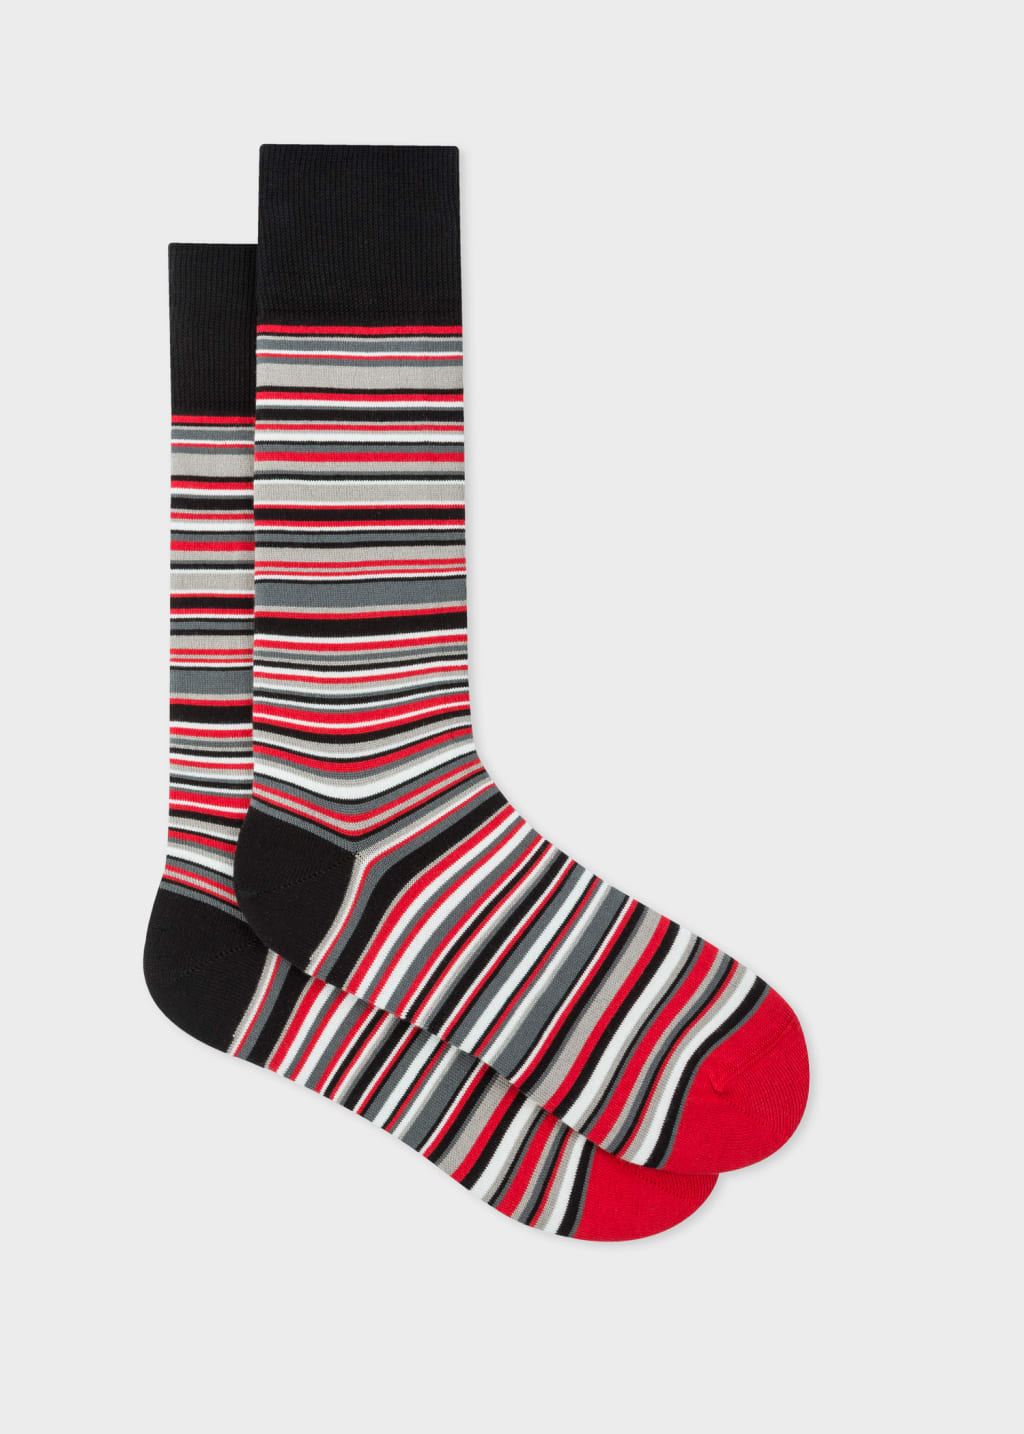 Pair View - Paul Smith & Manchester United - Credit Card Holder & 3 Pack Men's Socks Gift Set Paul Smith